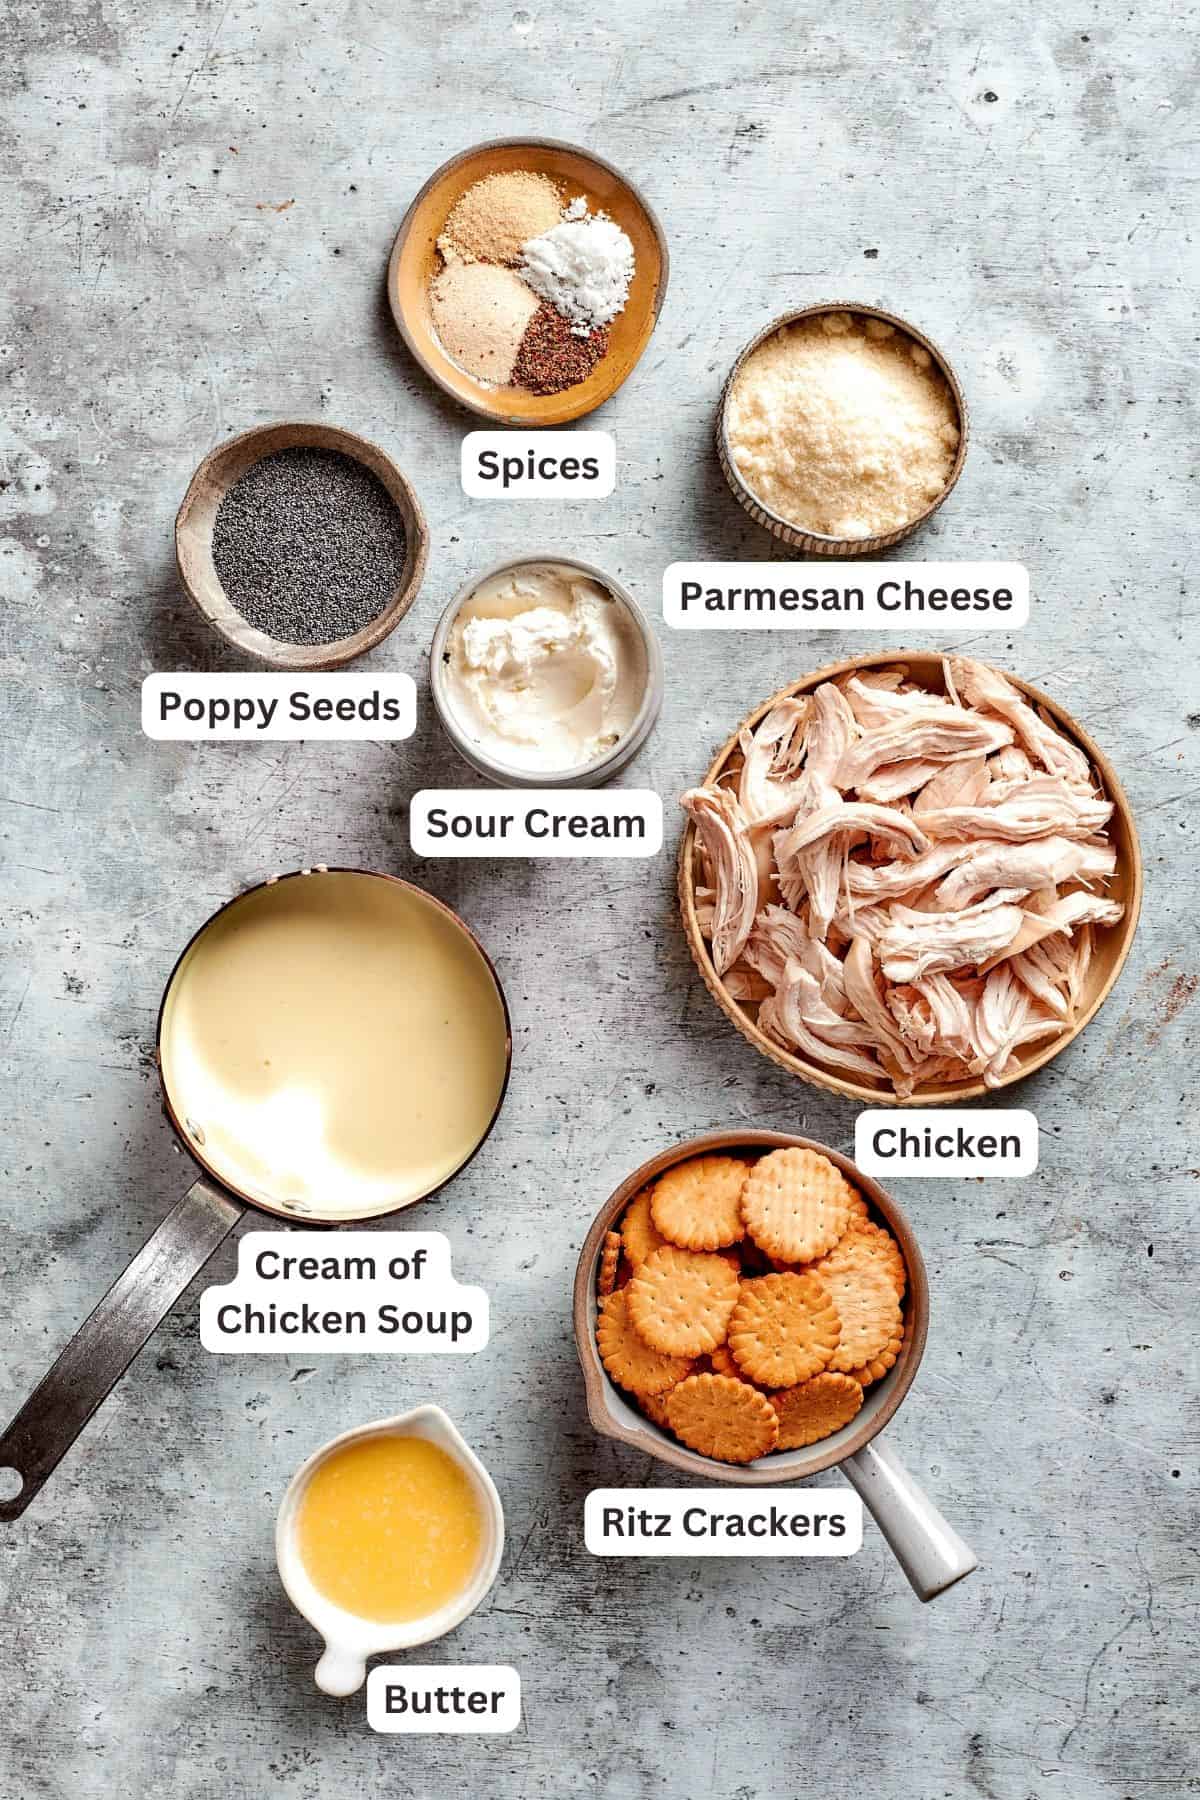 The ingredients for poppy seed chicken are shown: poppy seeds, parmesan cheese, chicken, sour cream, spices, cream of chicken soup, Ritz crackers, butter.